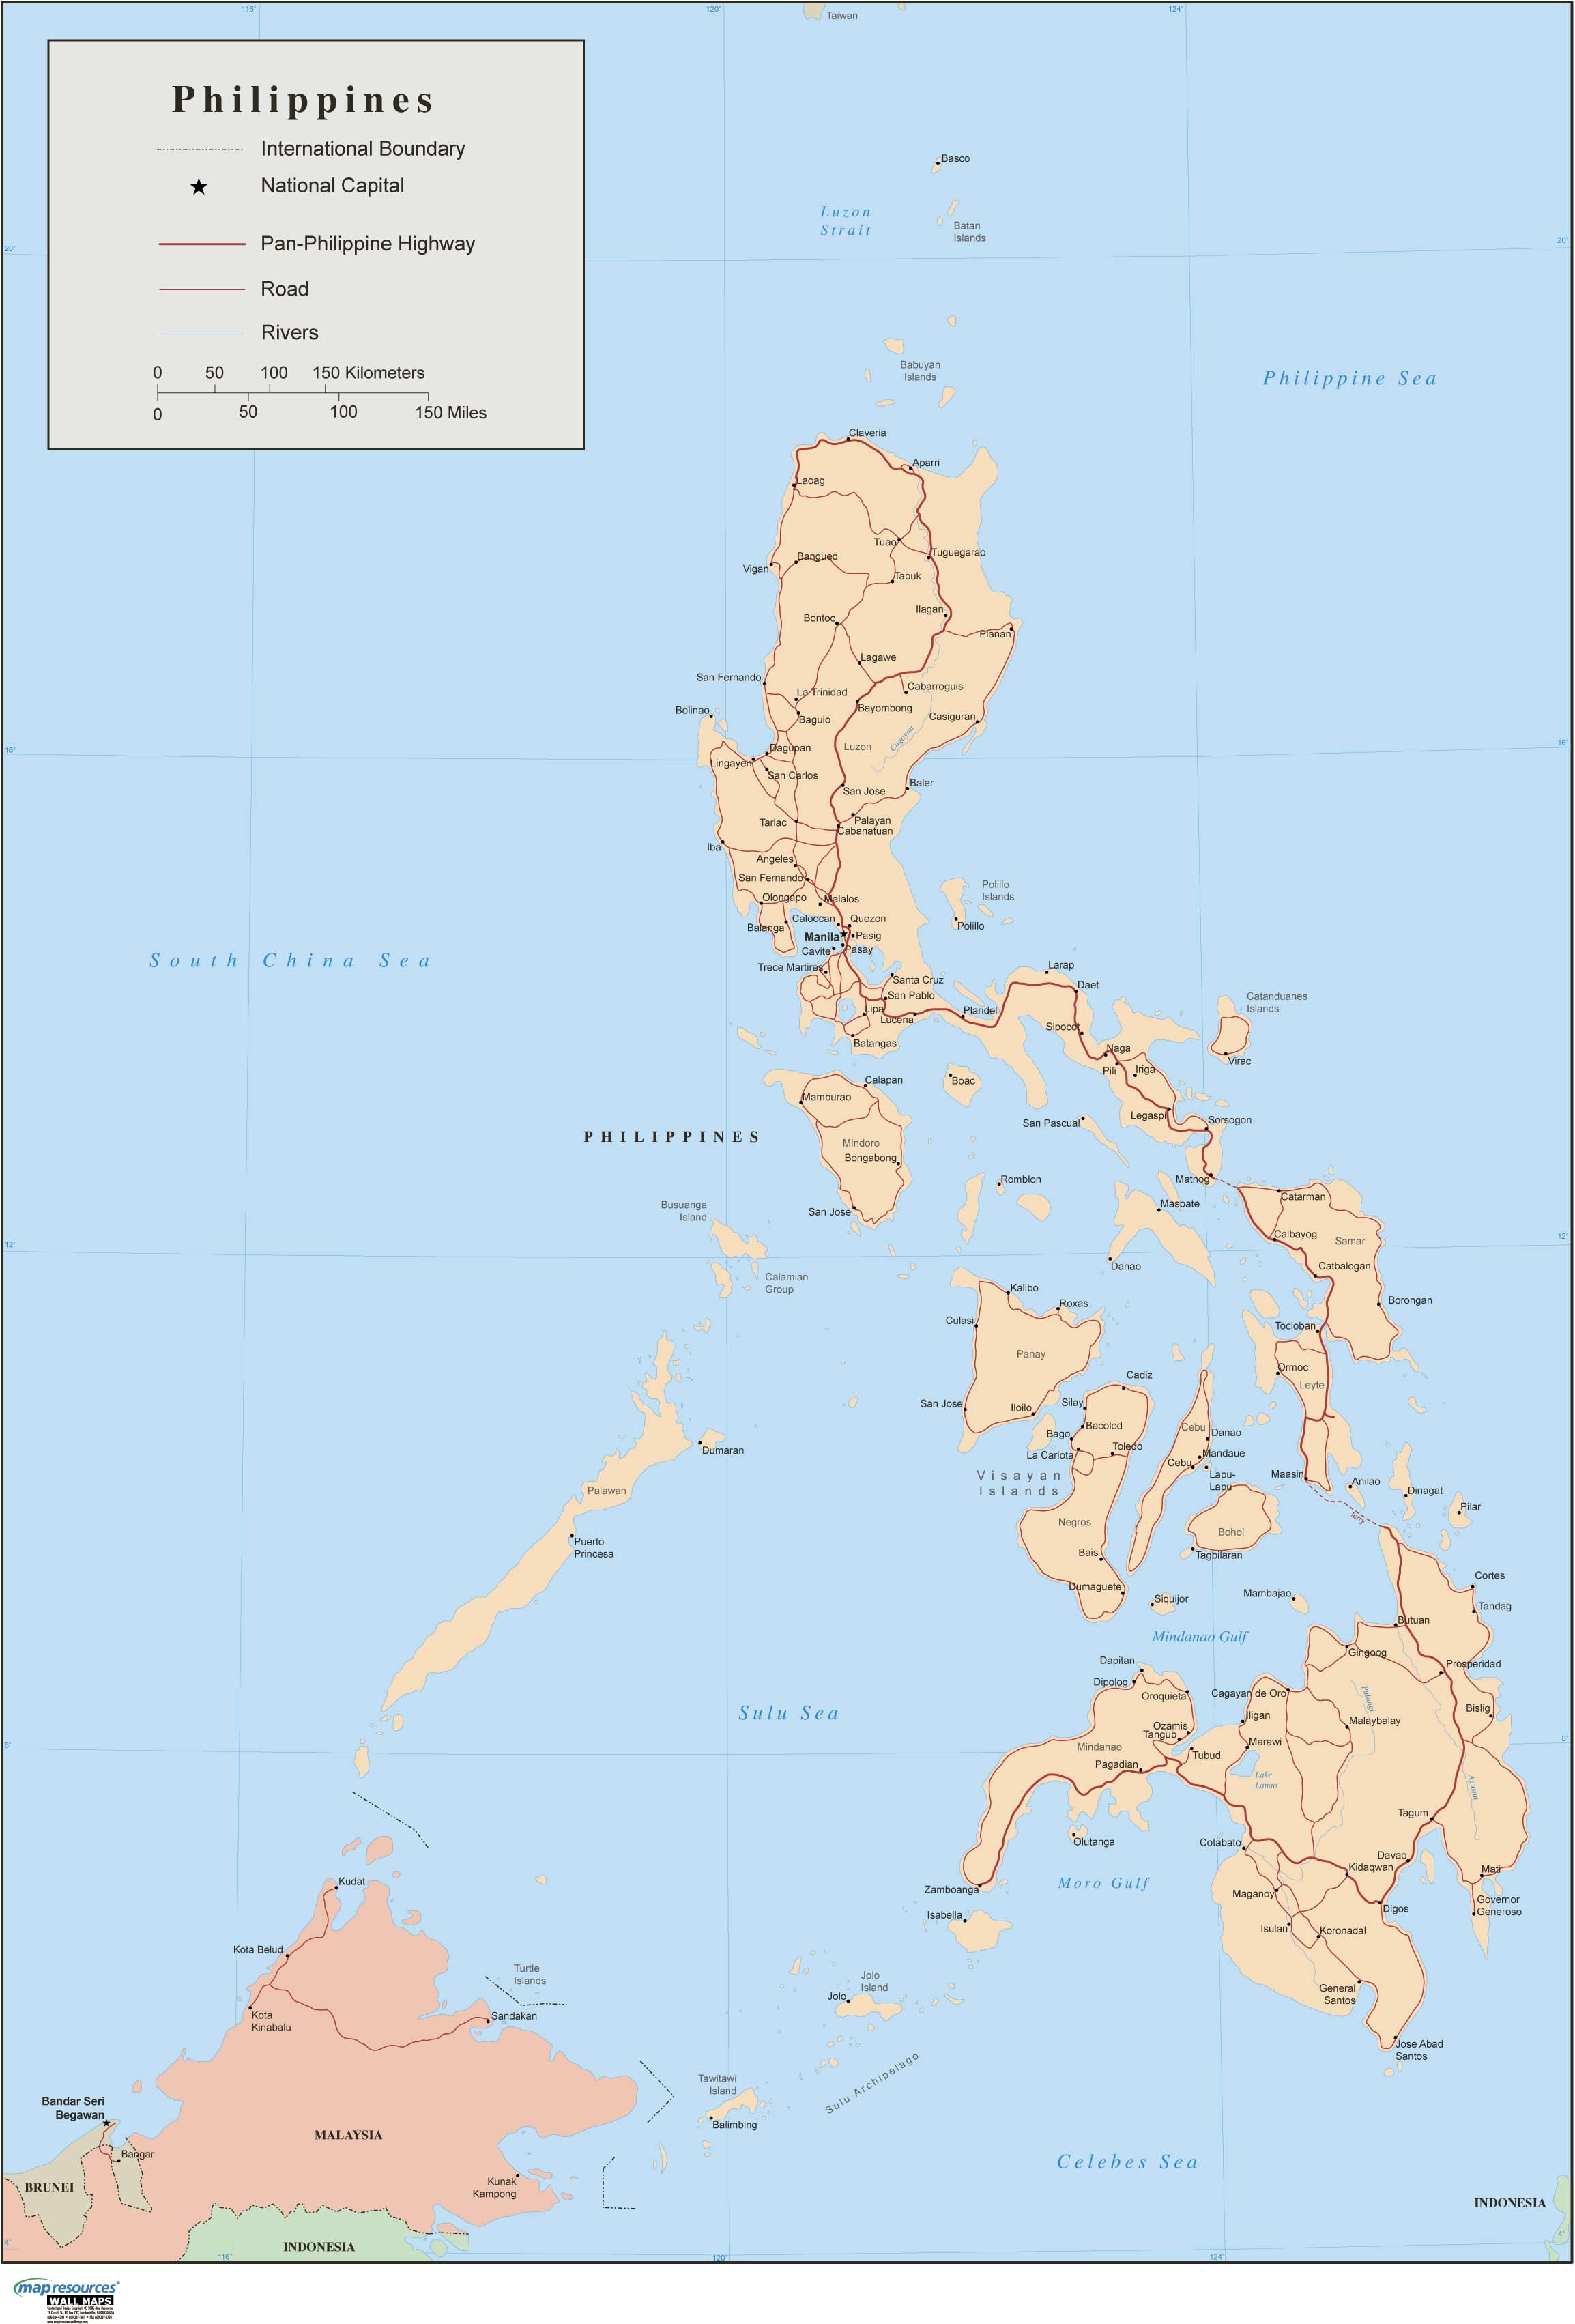 Philippines Wall Map by Map Resources - MapSales